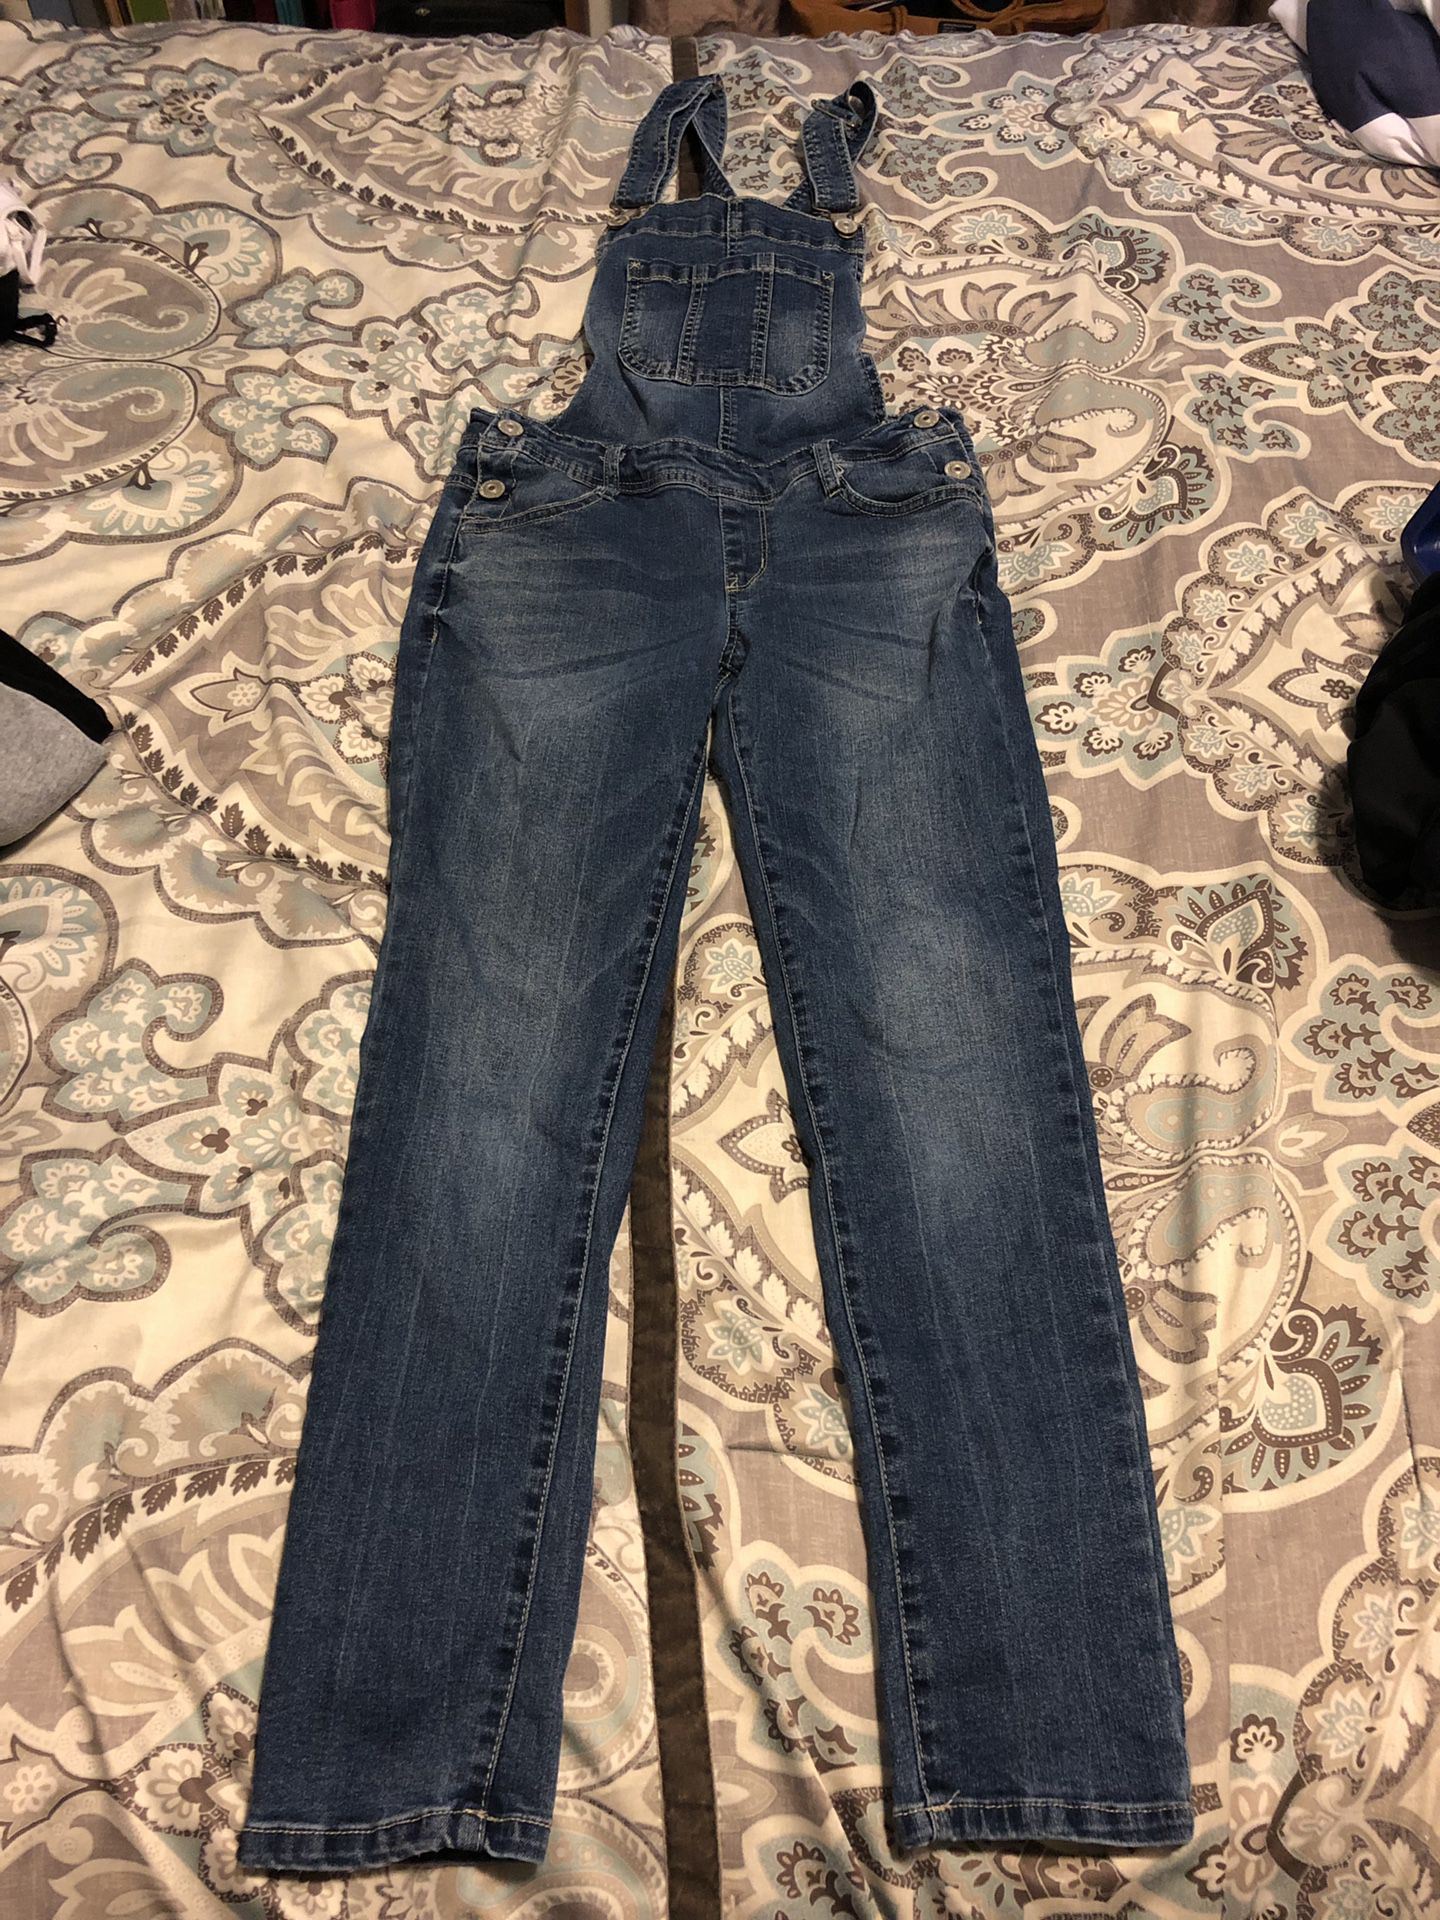 Women’s size small overalls